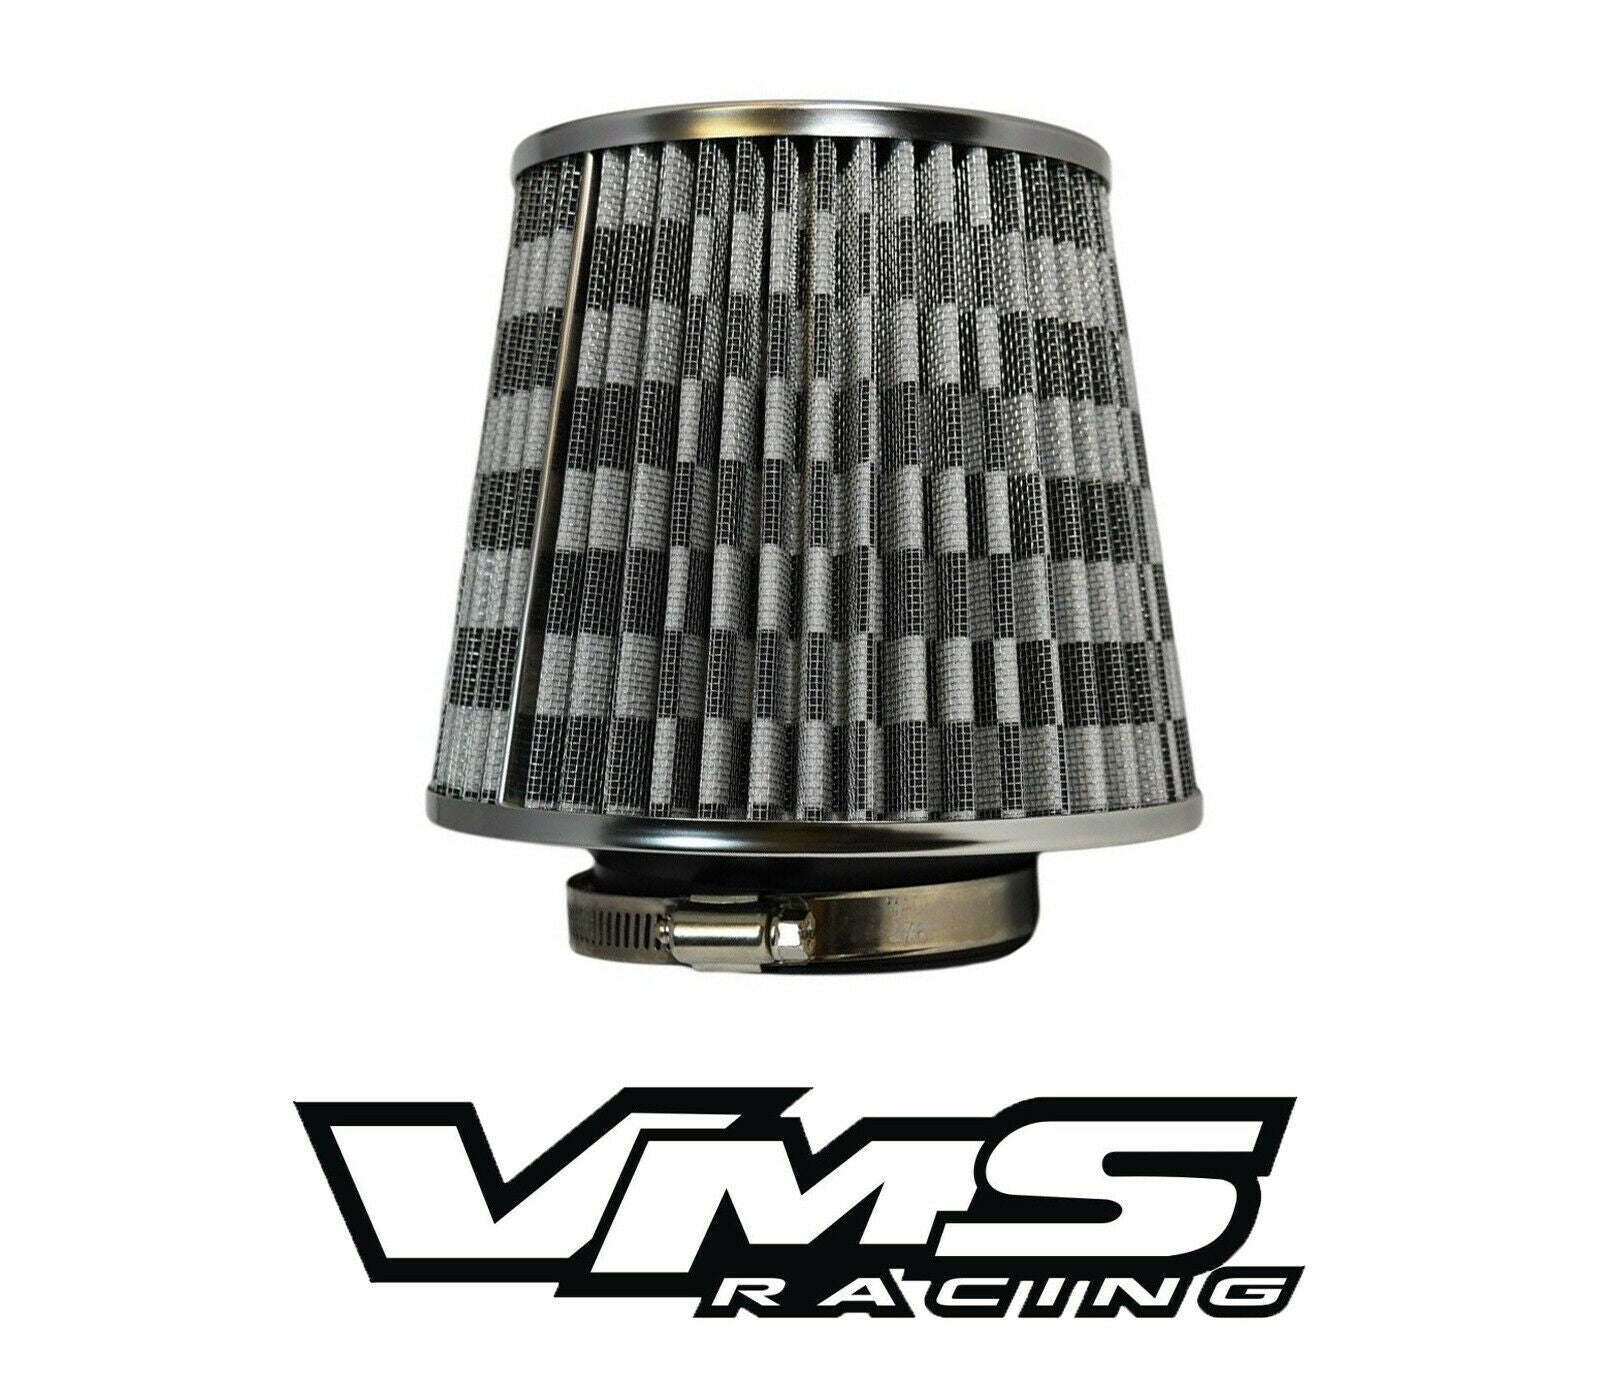 VMS RACING 3 INCH AIR INTAKE HIGH FLOW AIR FILTER FOR TOYOTA COROLLA CELICA MR2